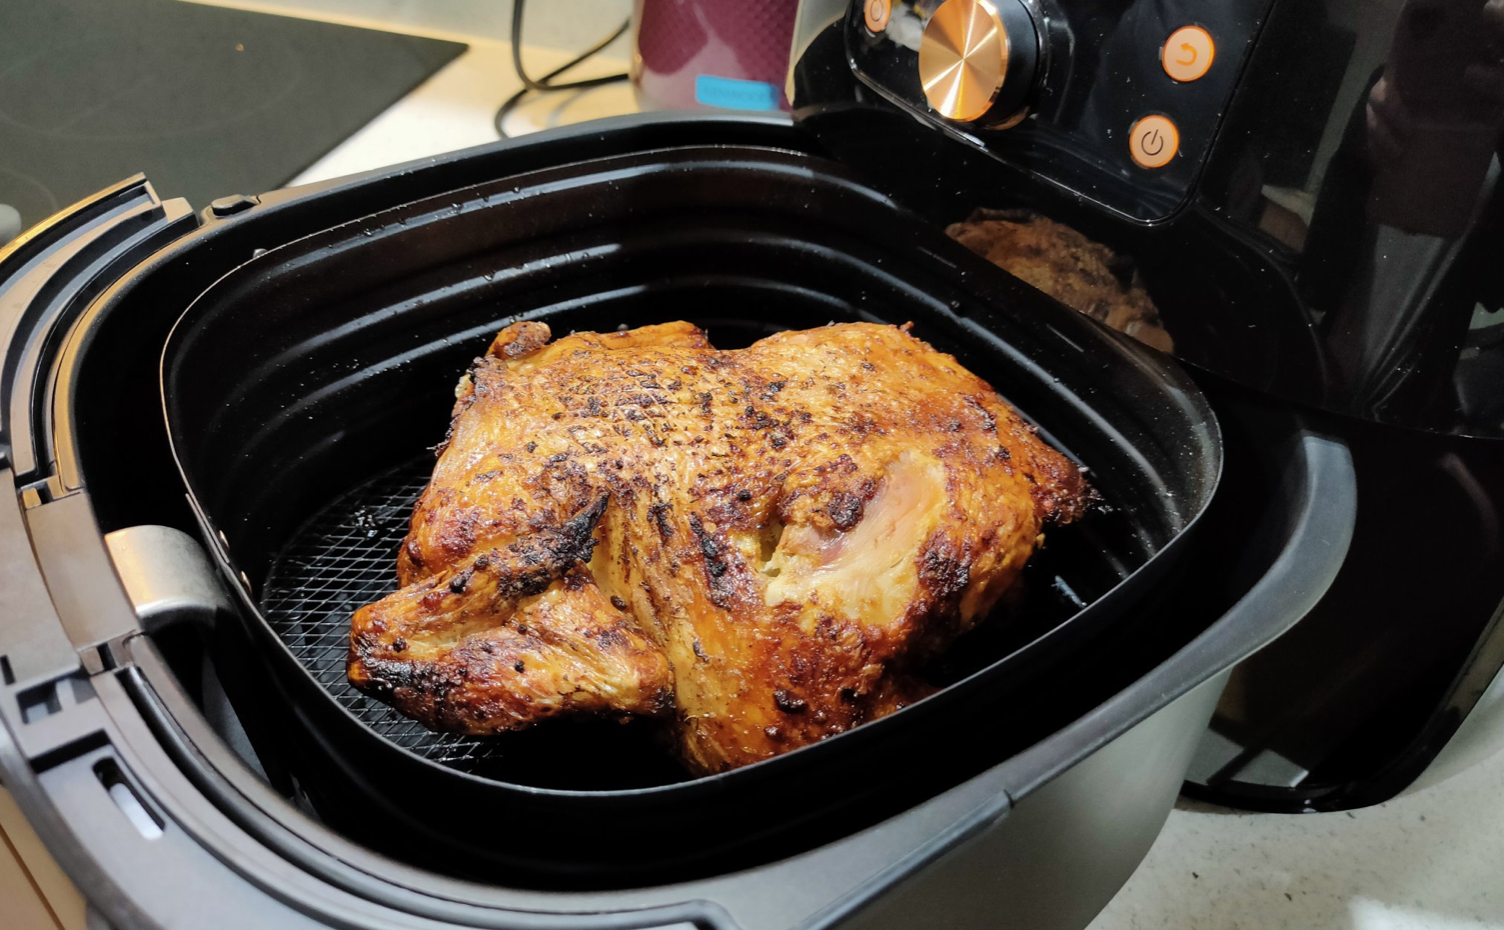 Philips Airfryer XXL review: you can get a whole chicken in this health  fryer